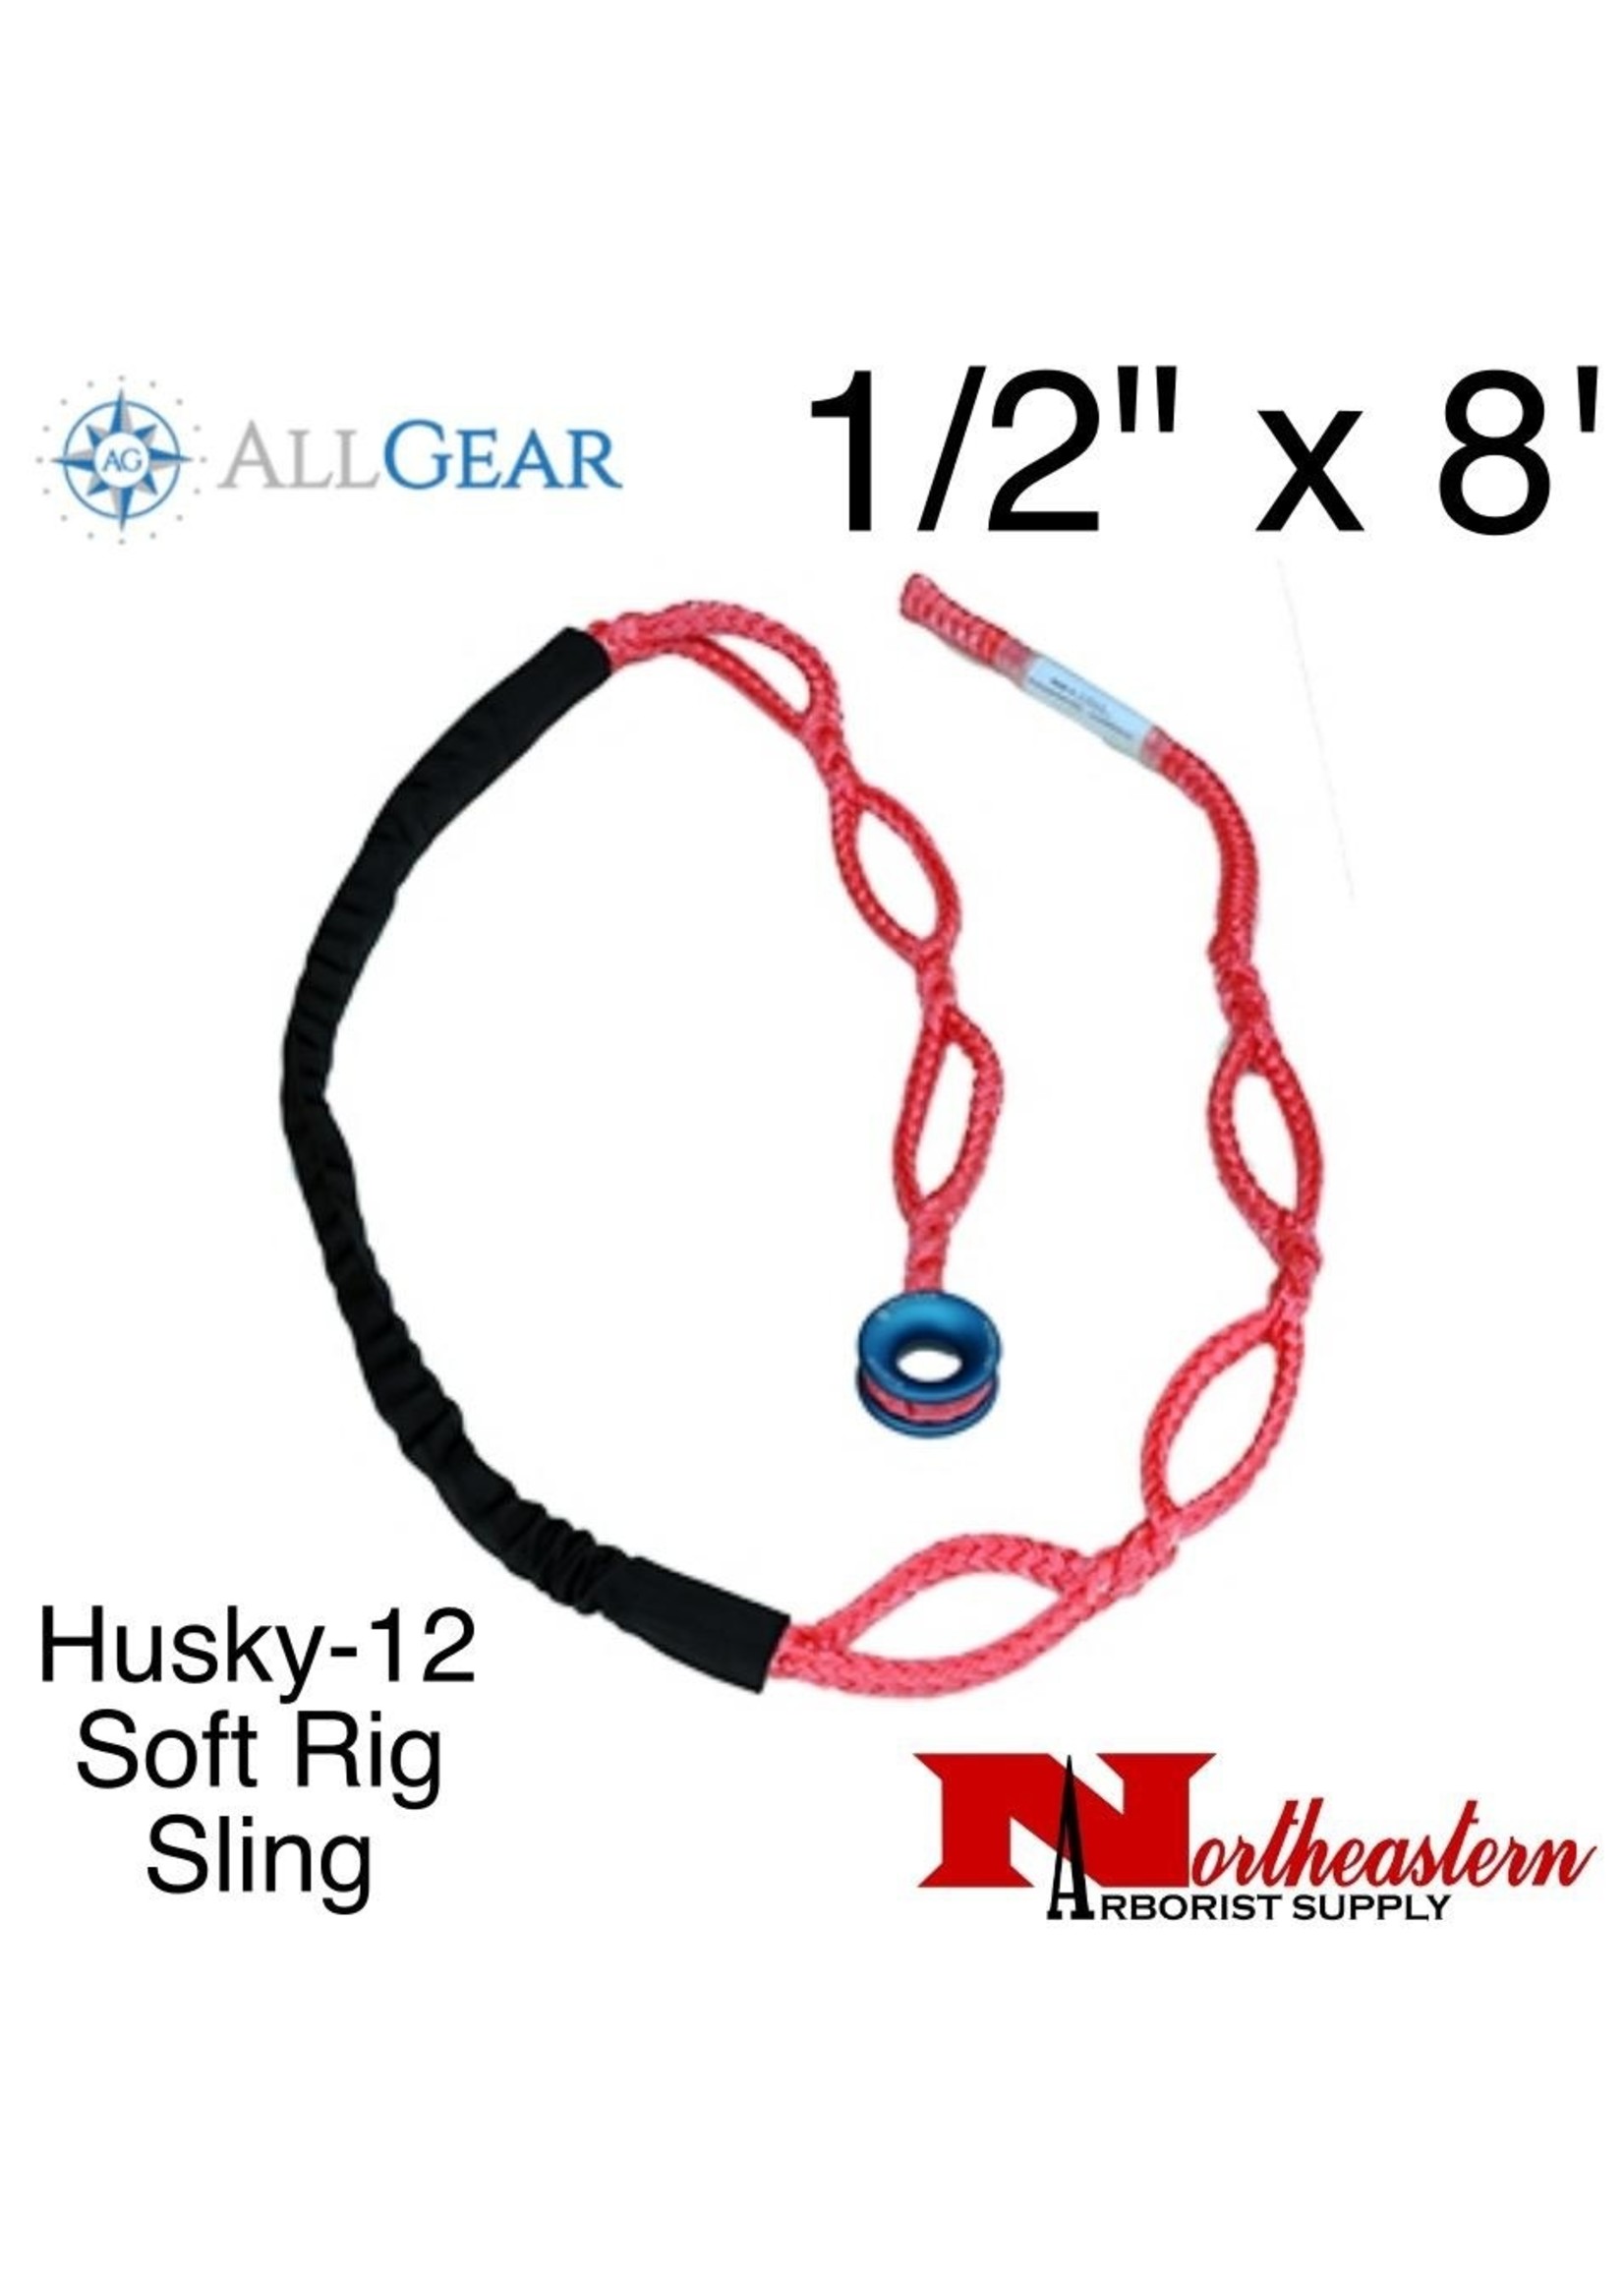 All Gear Inc. Husky - Soft Rig Sling 1/2" X 8' With Low Friction Ring & Chafe Cover, AGSRS12S128